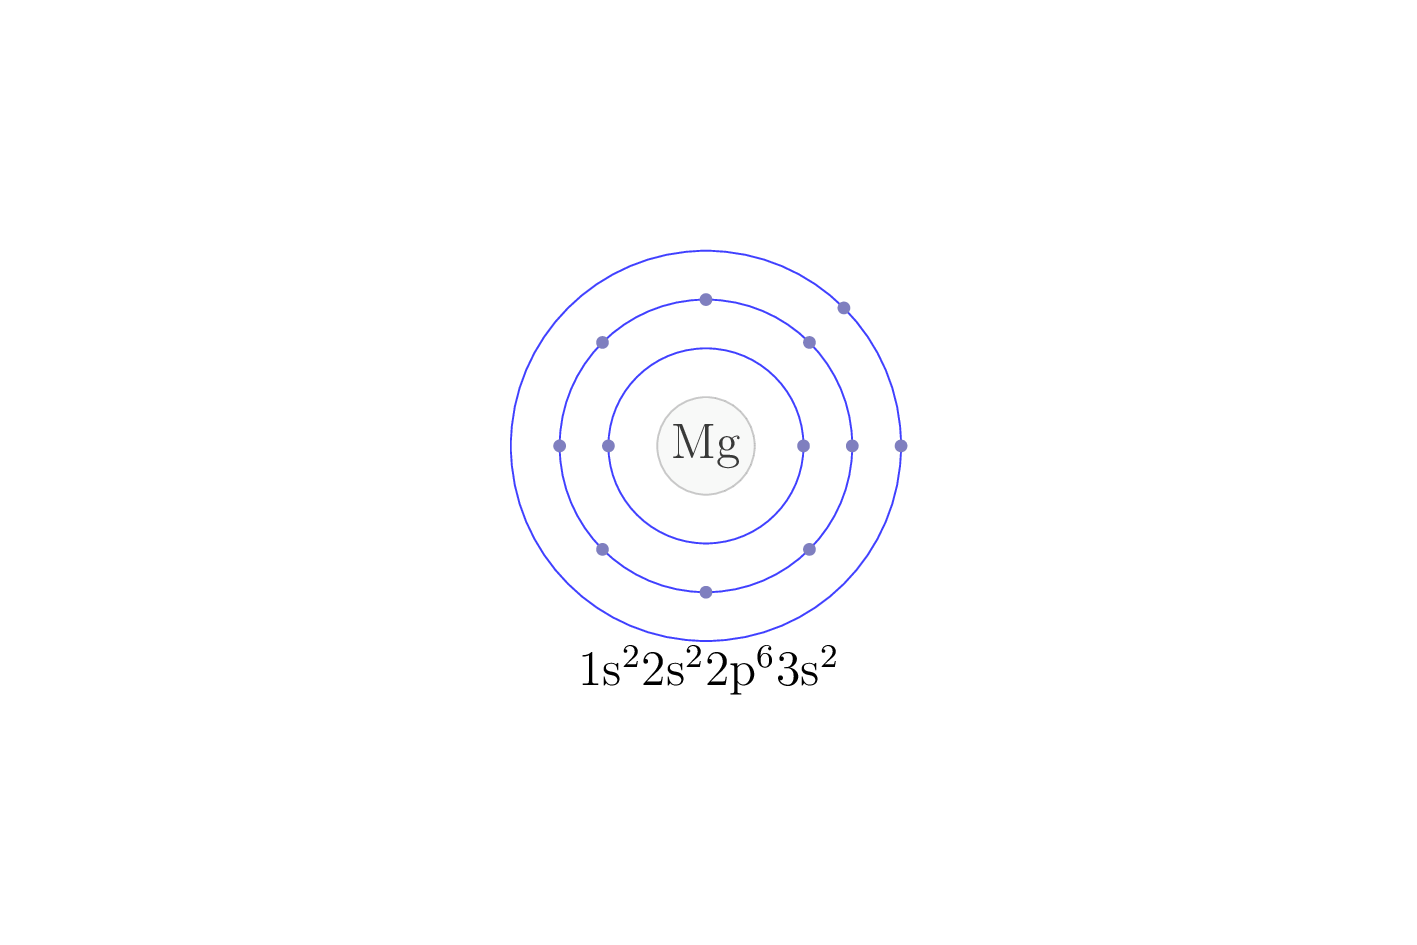 electron configuration of element Mg